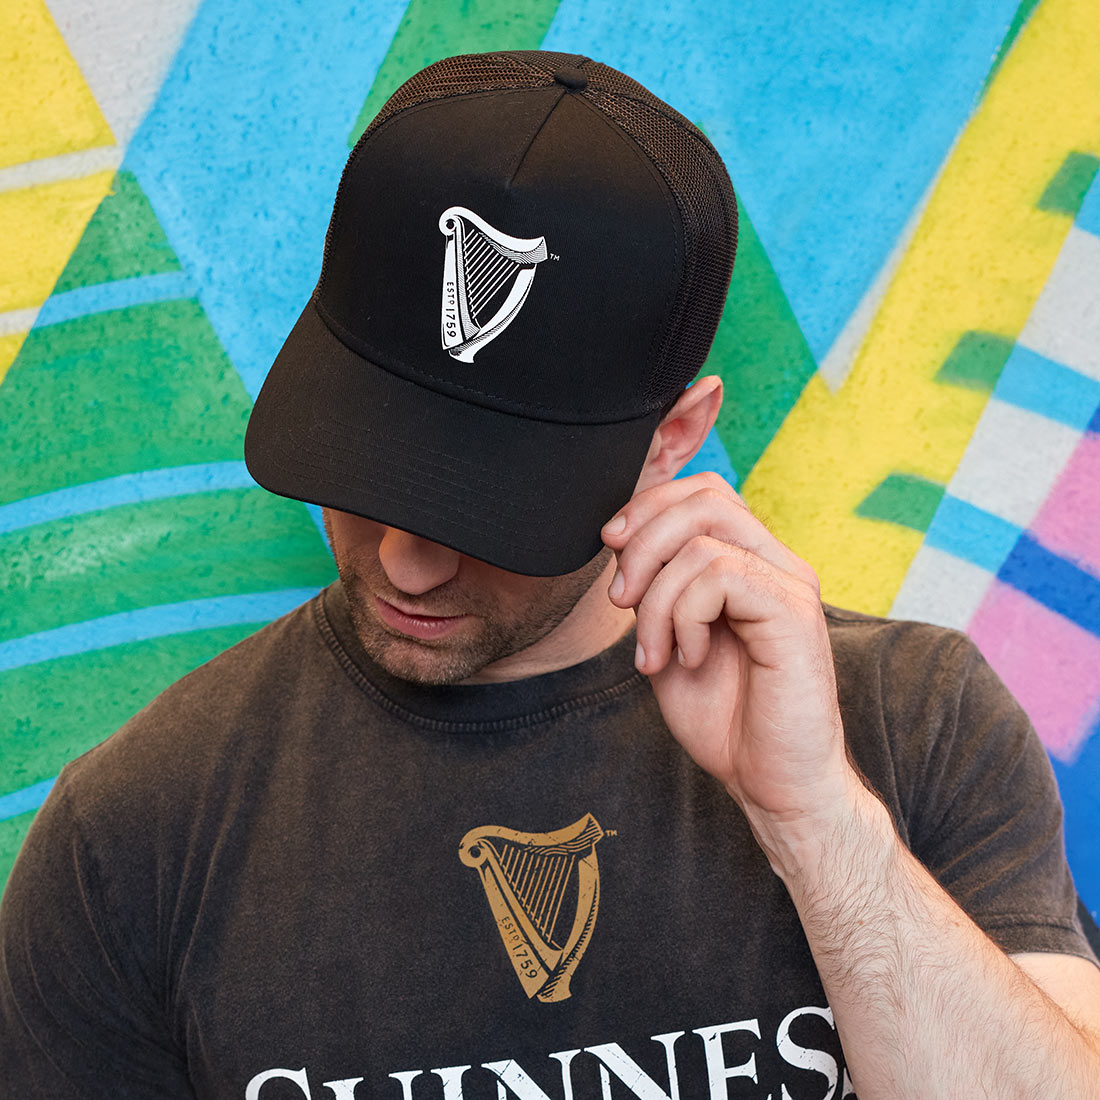 A man wearing a Guinness Premium Black & White Cap in front of a colorful wall.